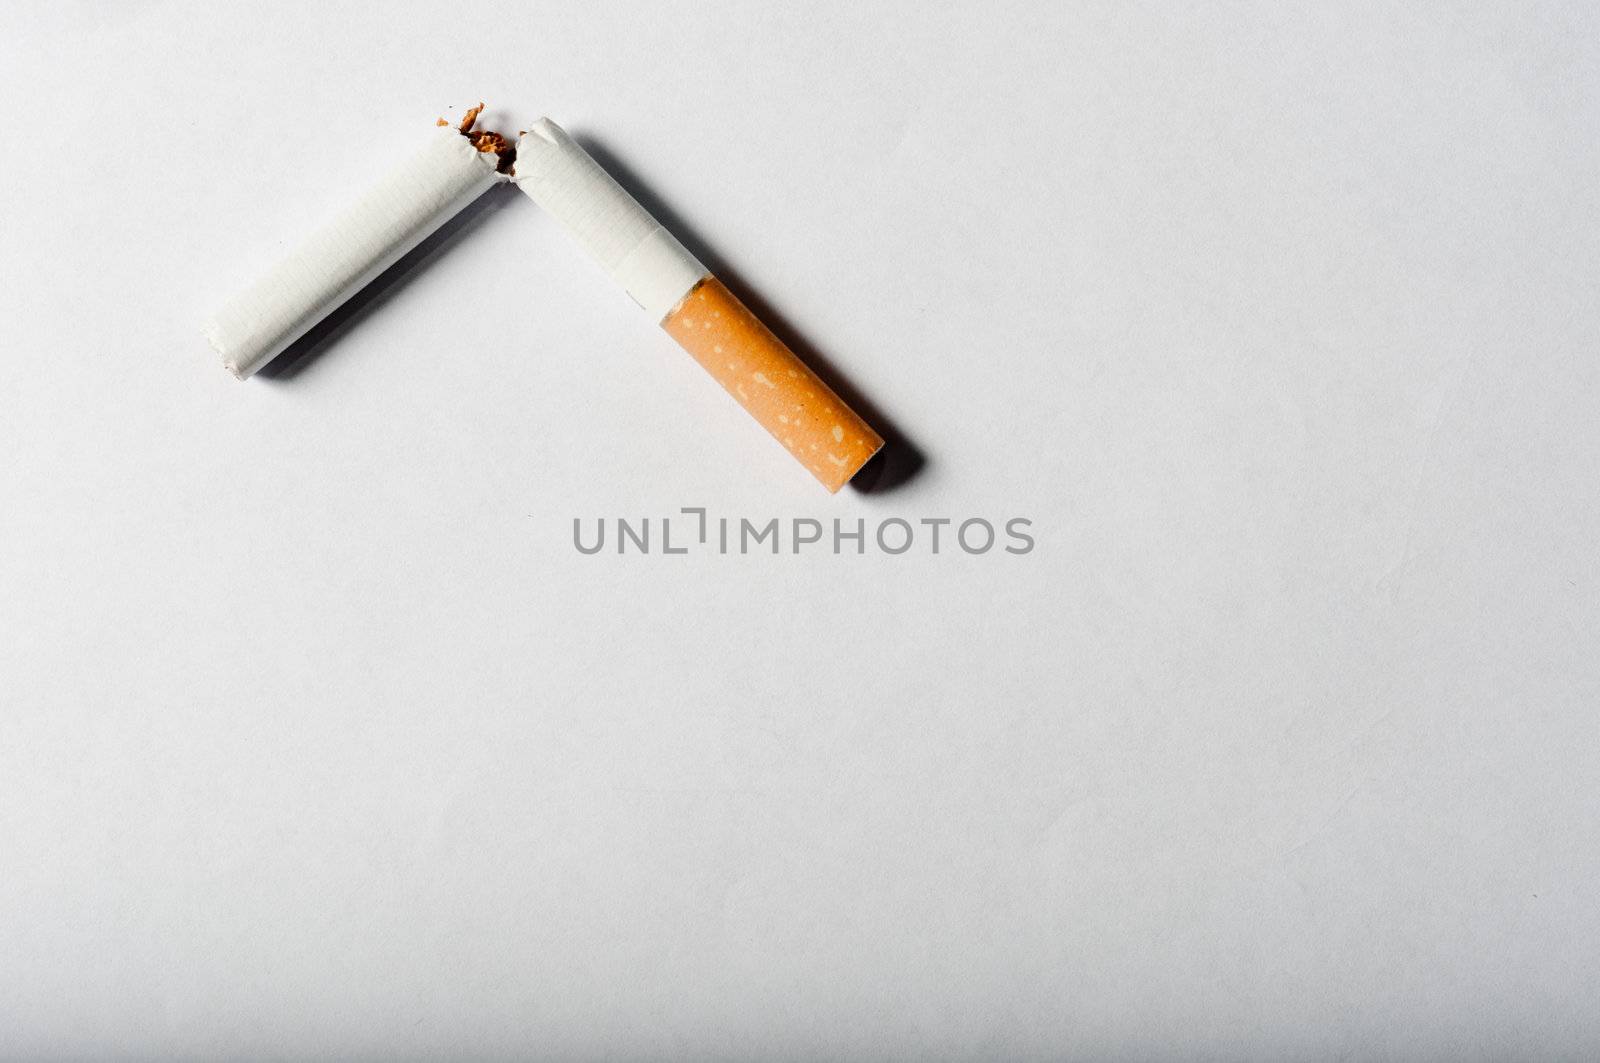 Broken cigarette on white background with harsh shadows by svedoliver